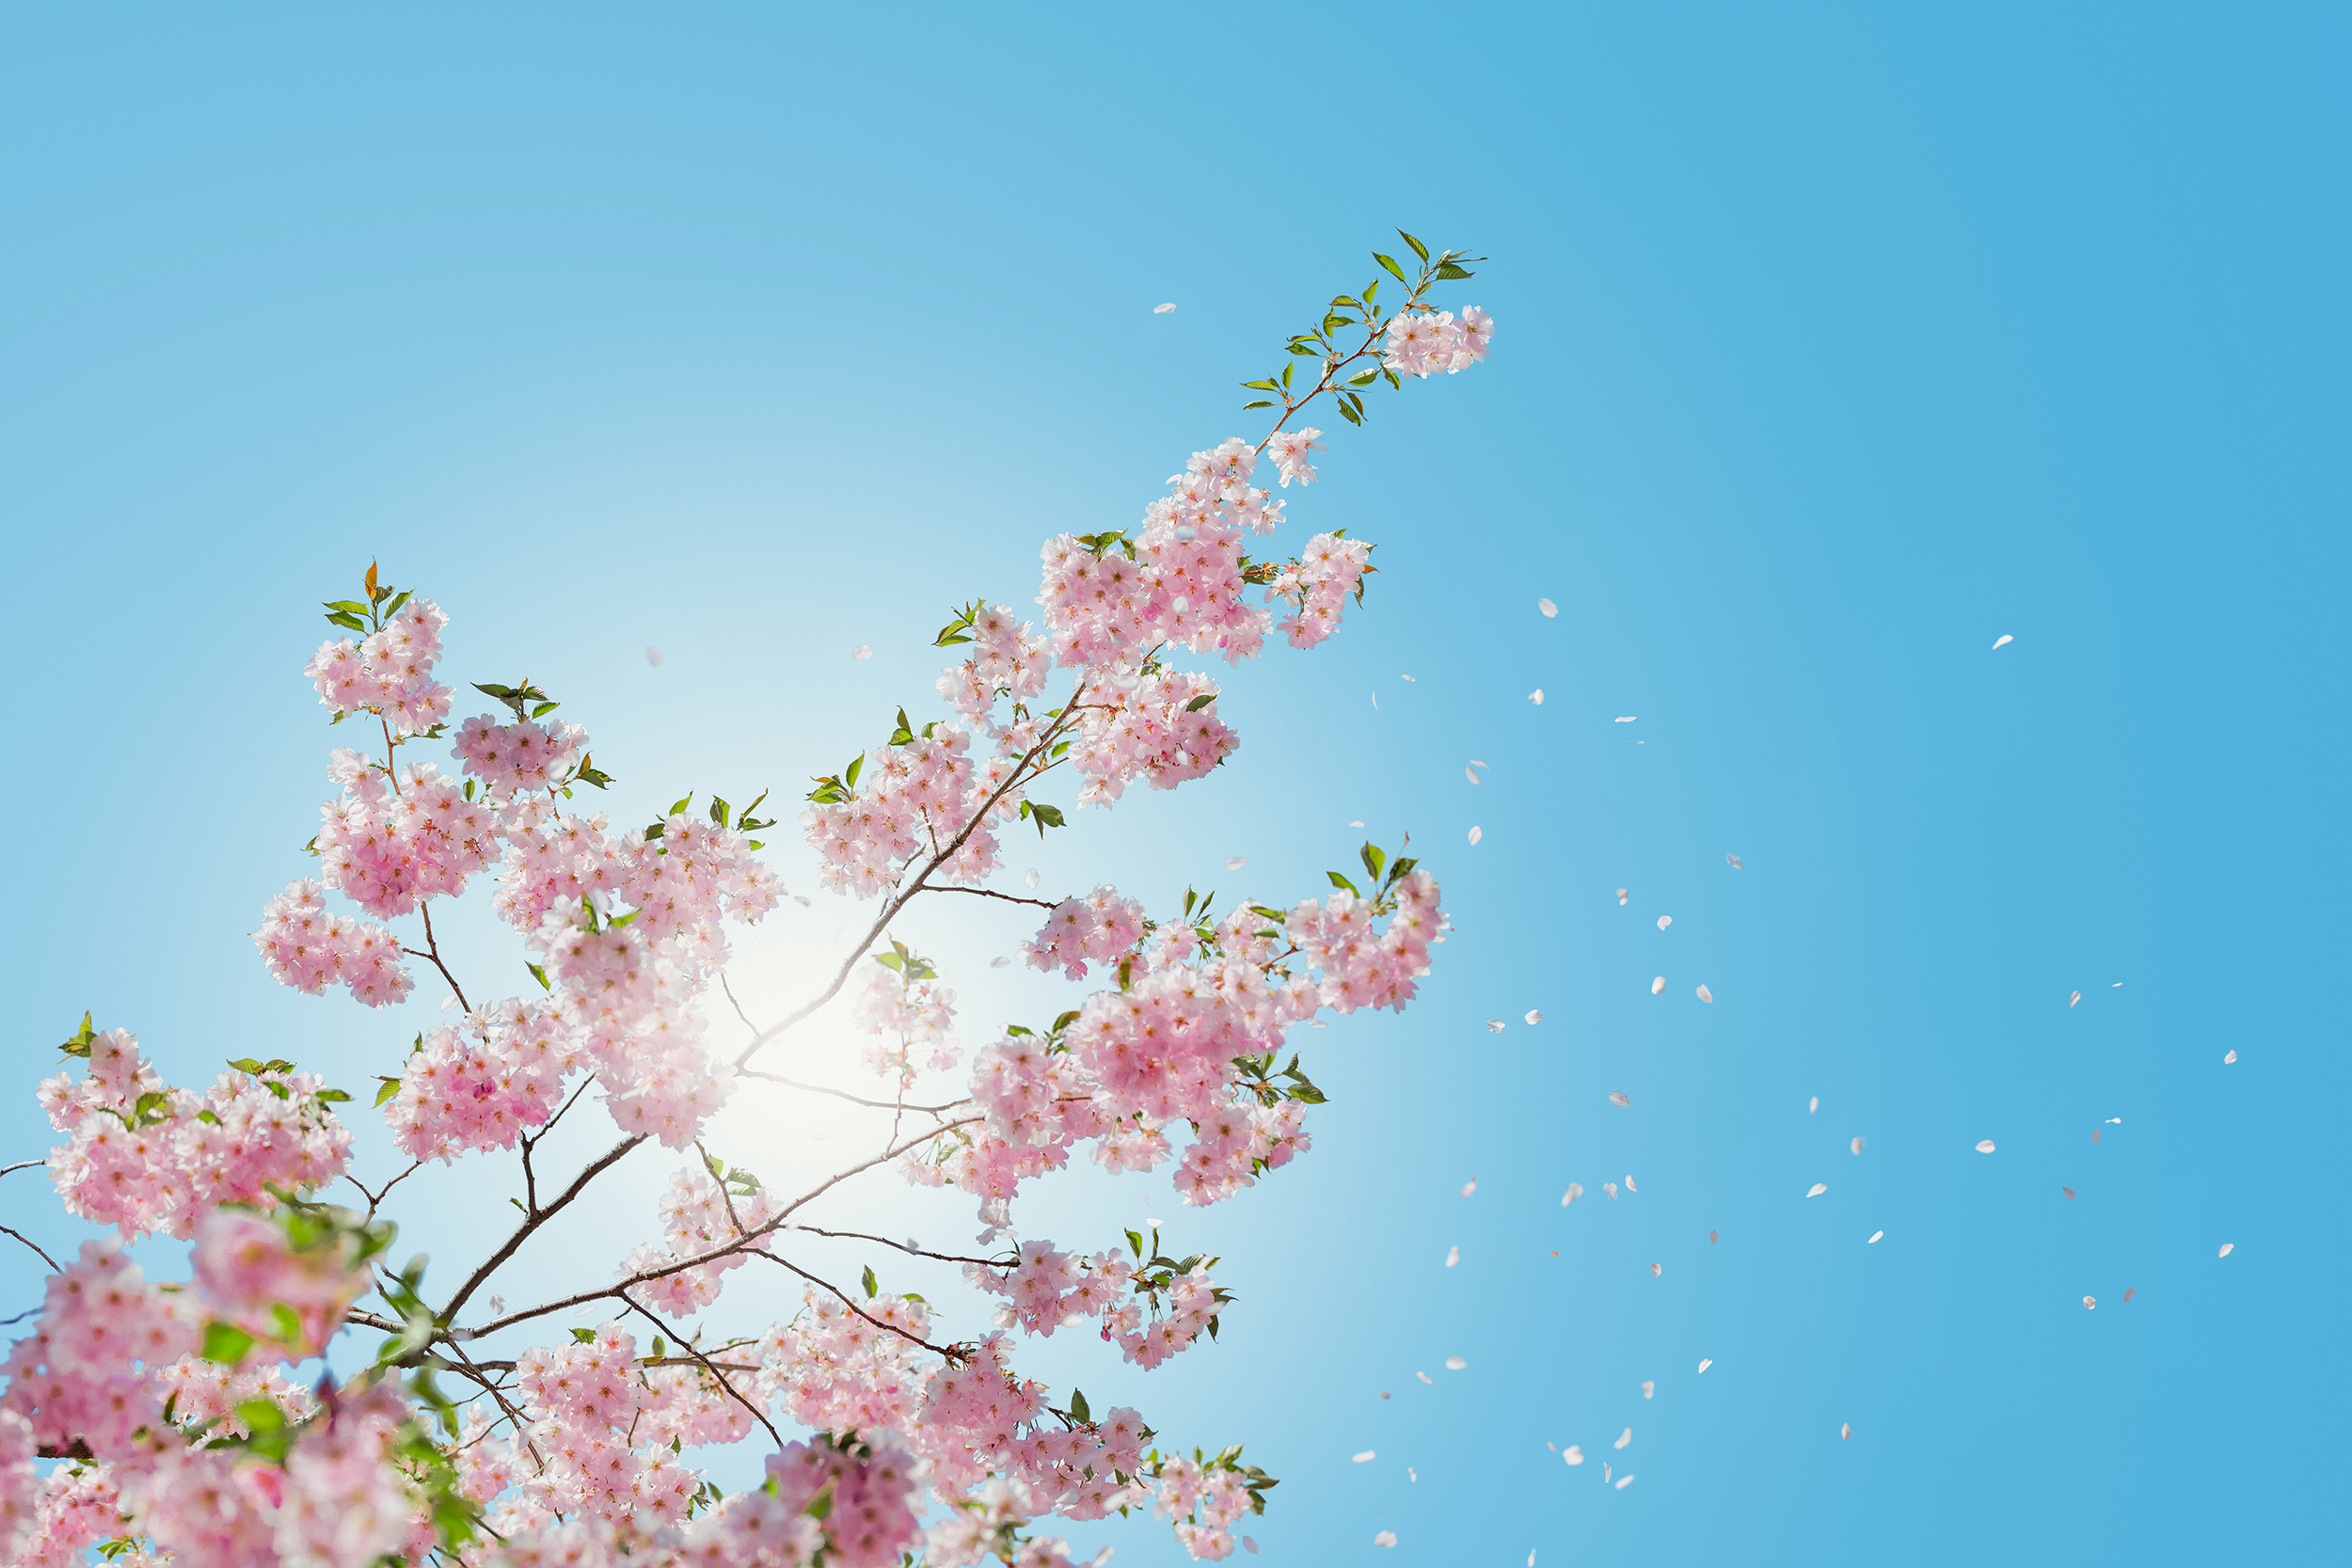 cherry-blossoms-hero-by-anders-jilden-89745-unsplash - What Should ...